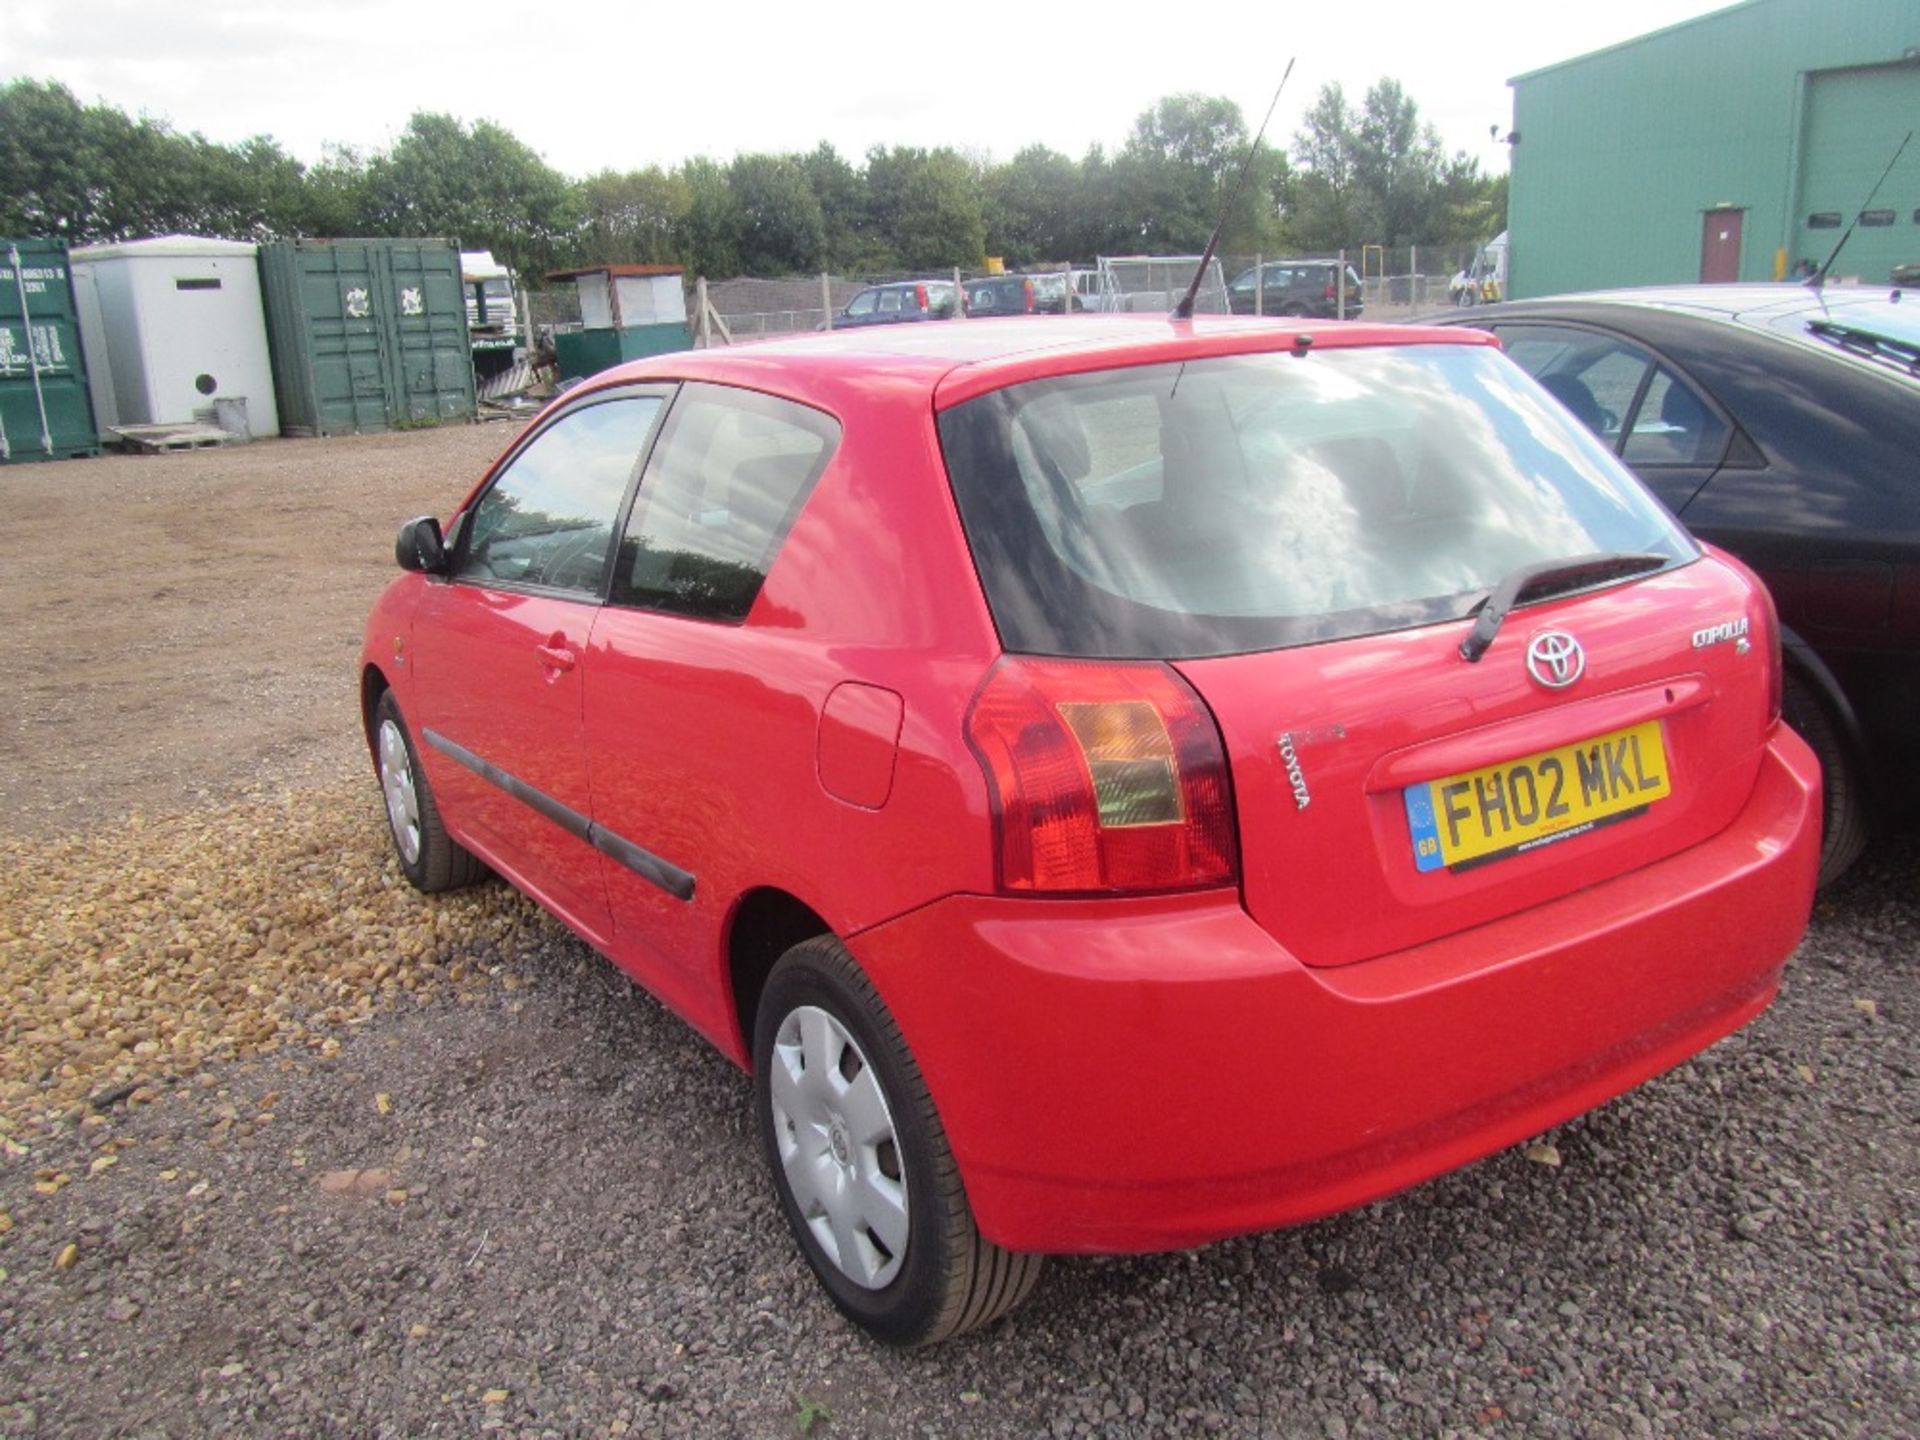 Toyota Corrola 1.4 Petrol. 1 Owner from new. Reg. Docs & Service History will be supplied Mileage: - Image 6 of 6